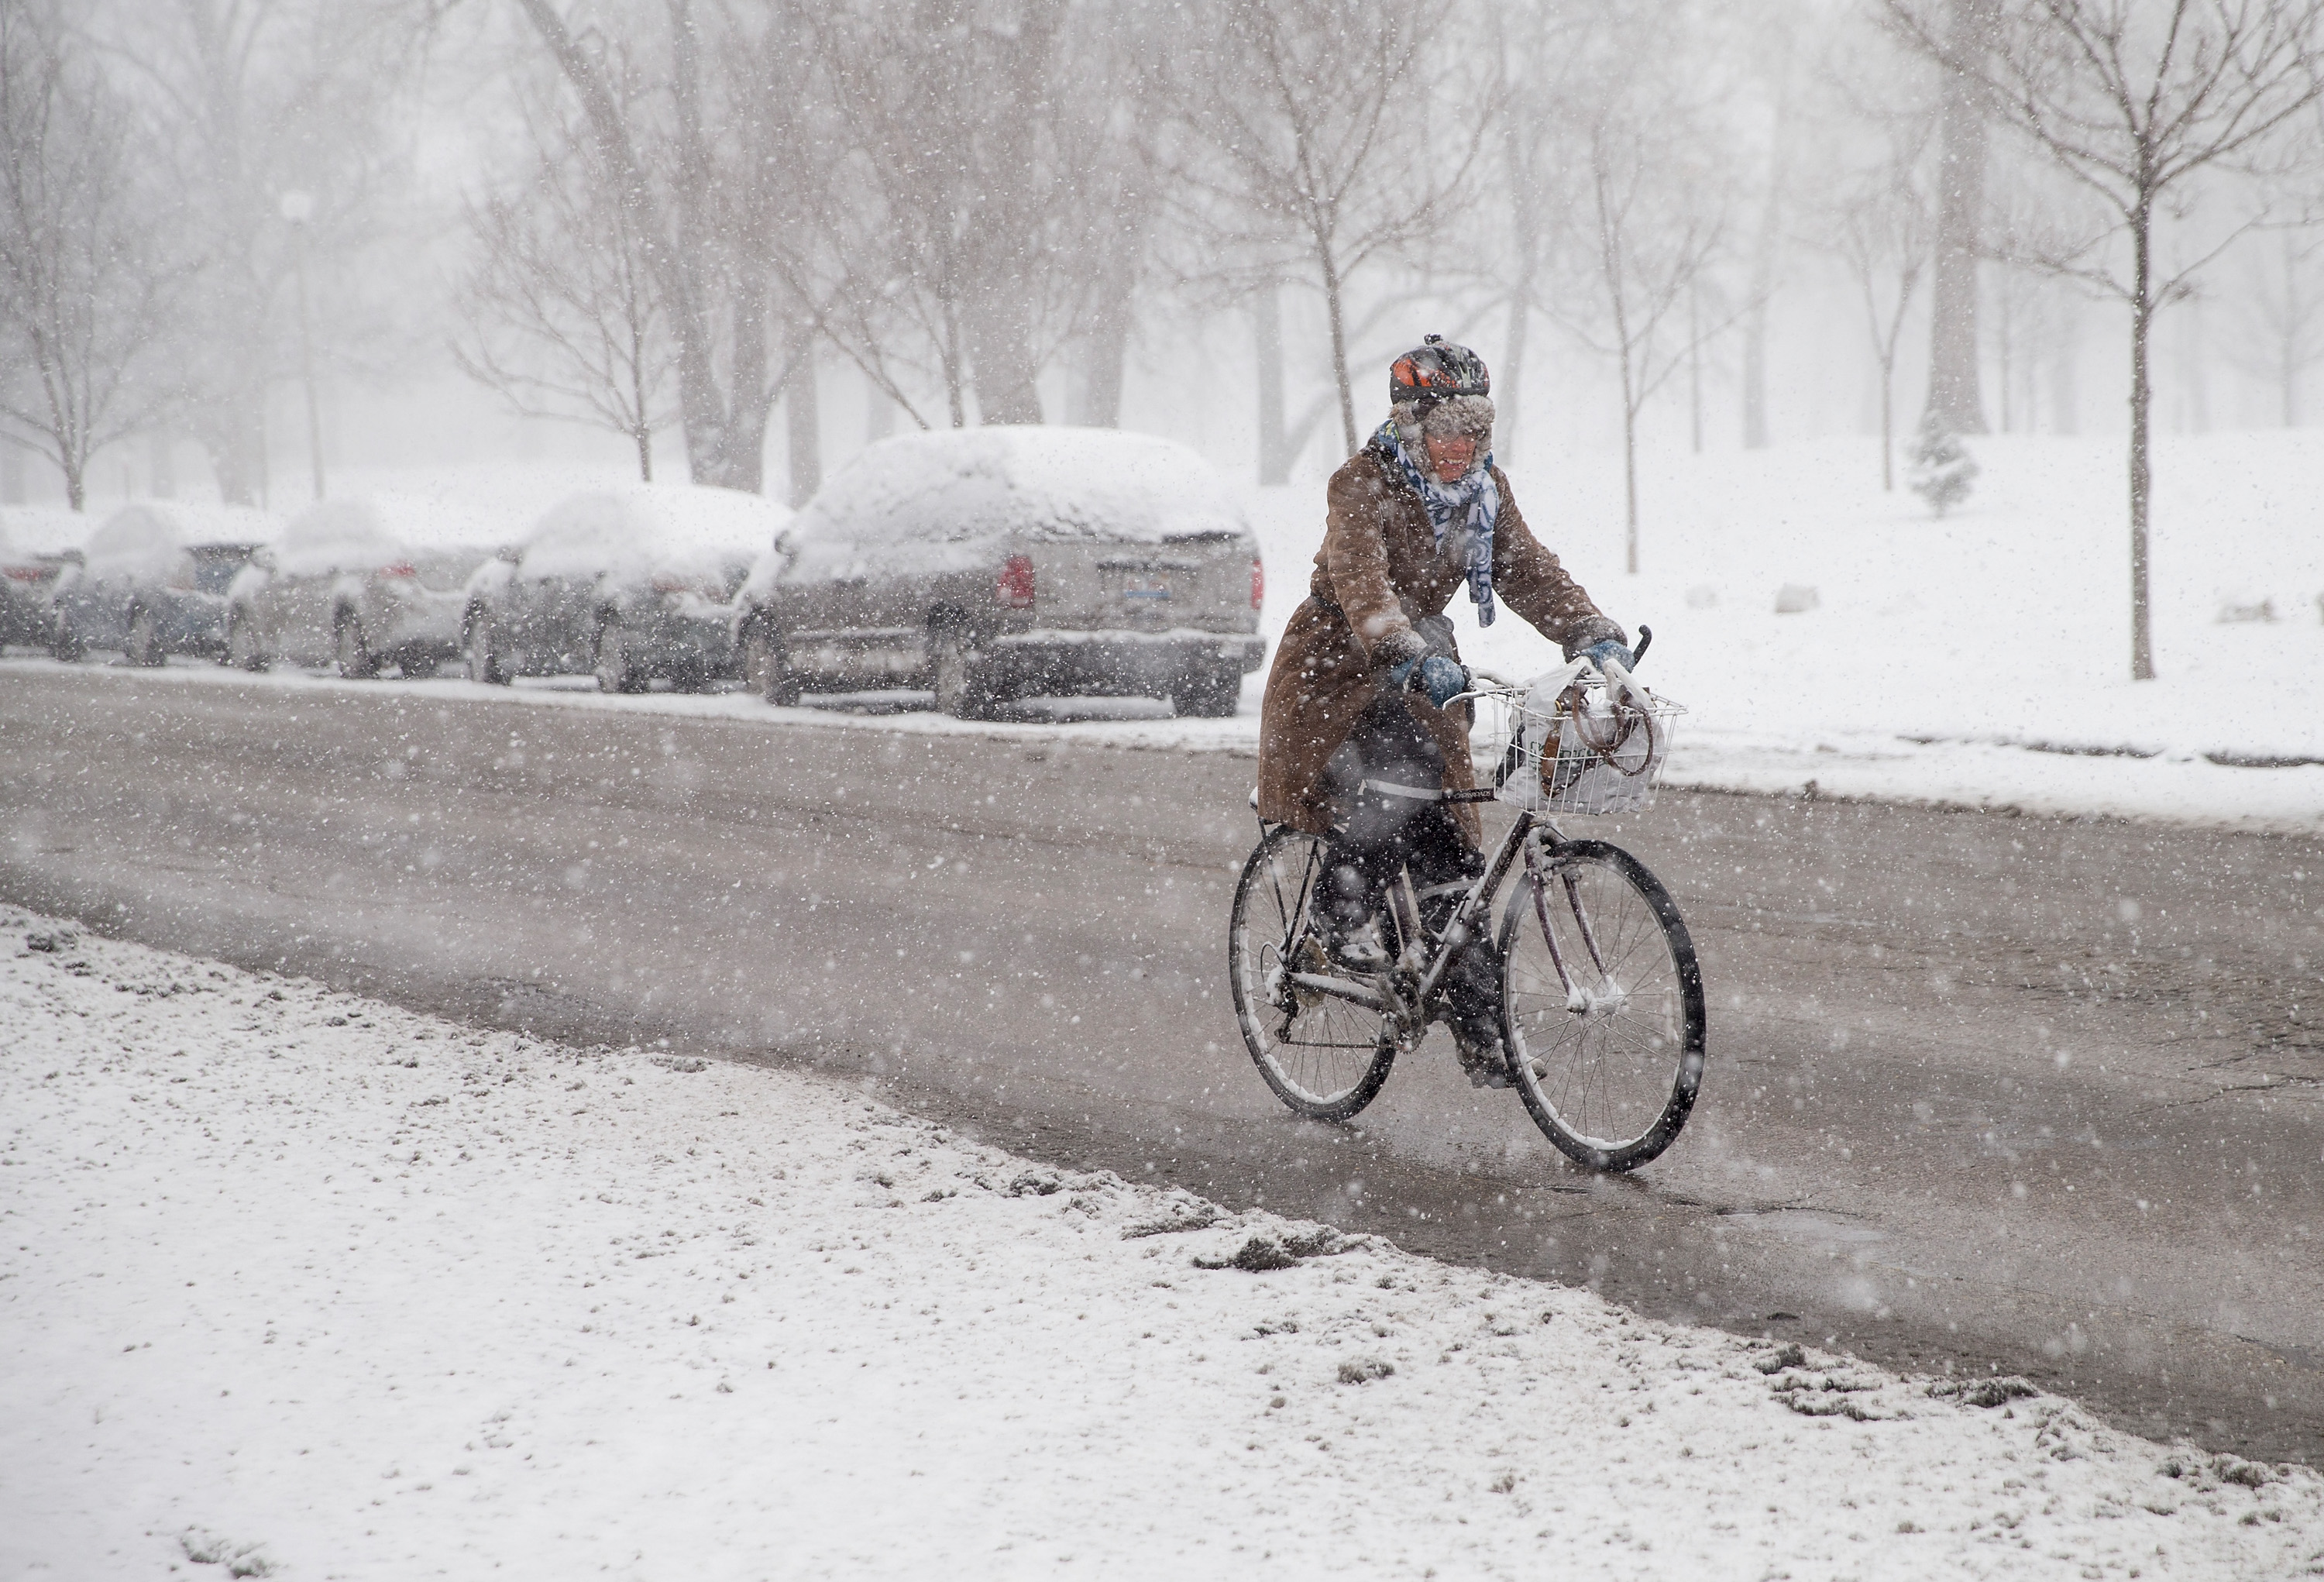 A woman on a bike rides through a snow street in Chicago.